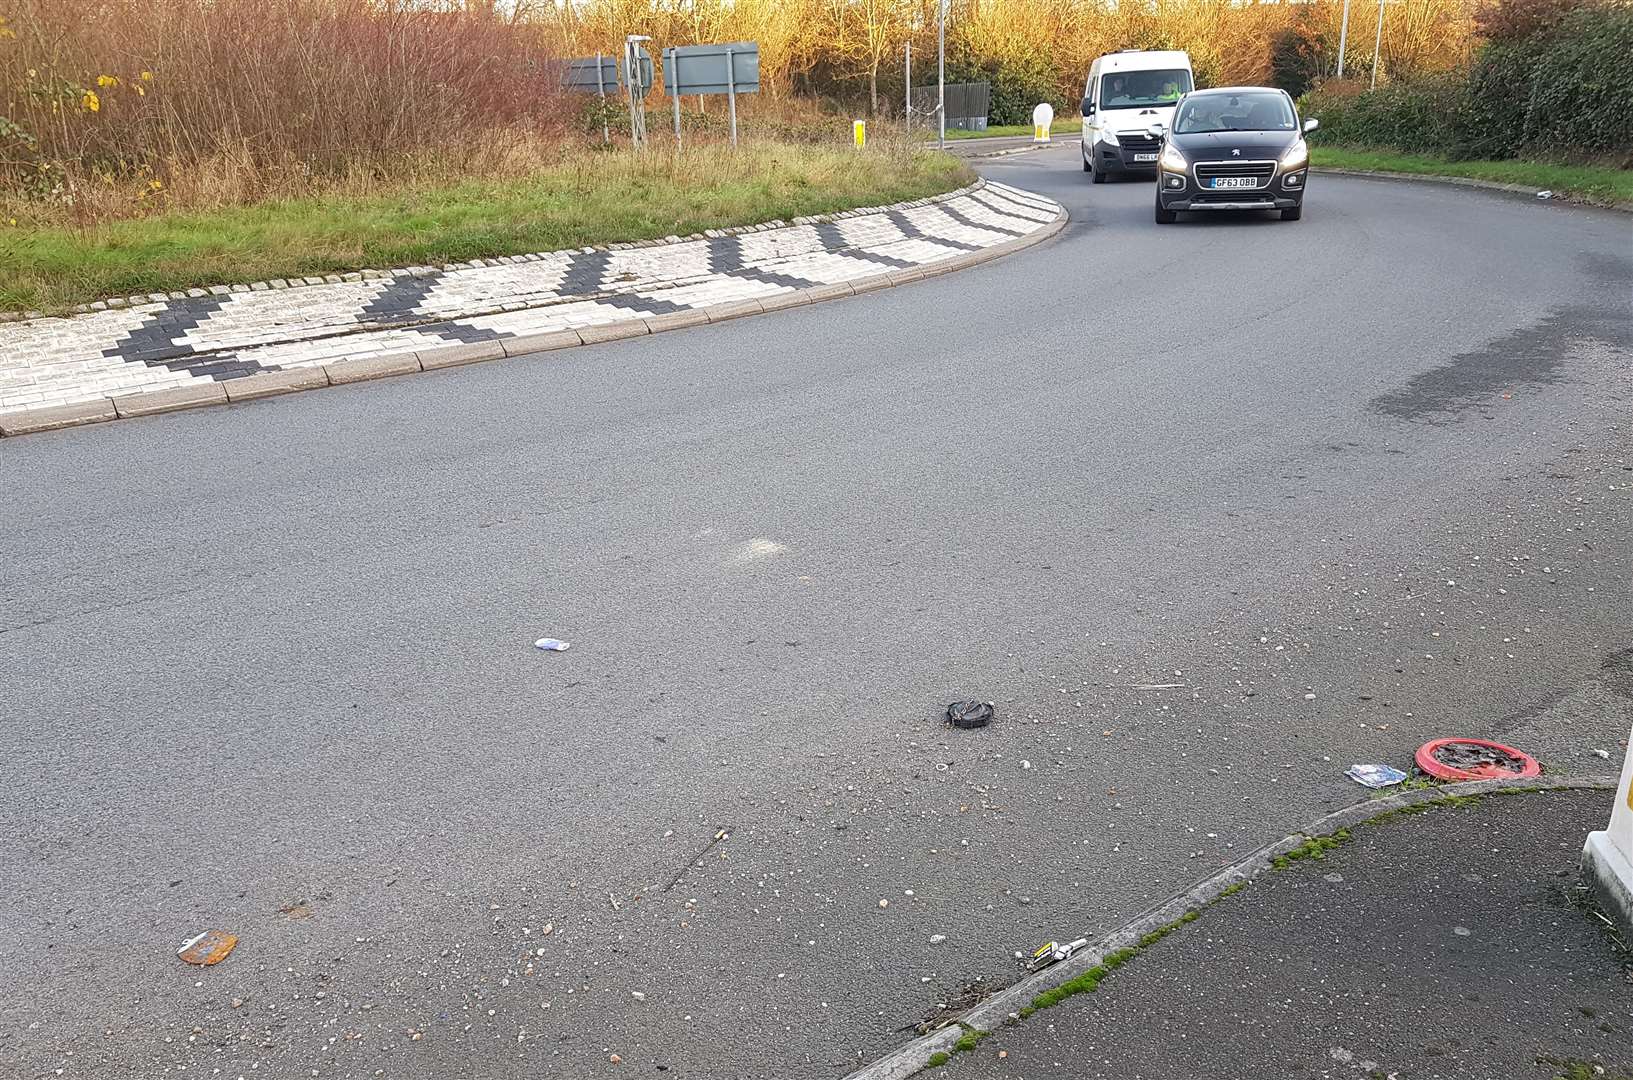 Some litter and debris is left on the carriageway